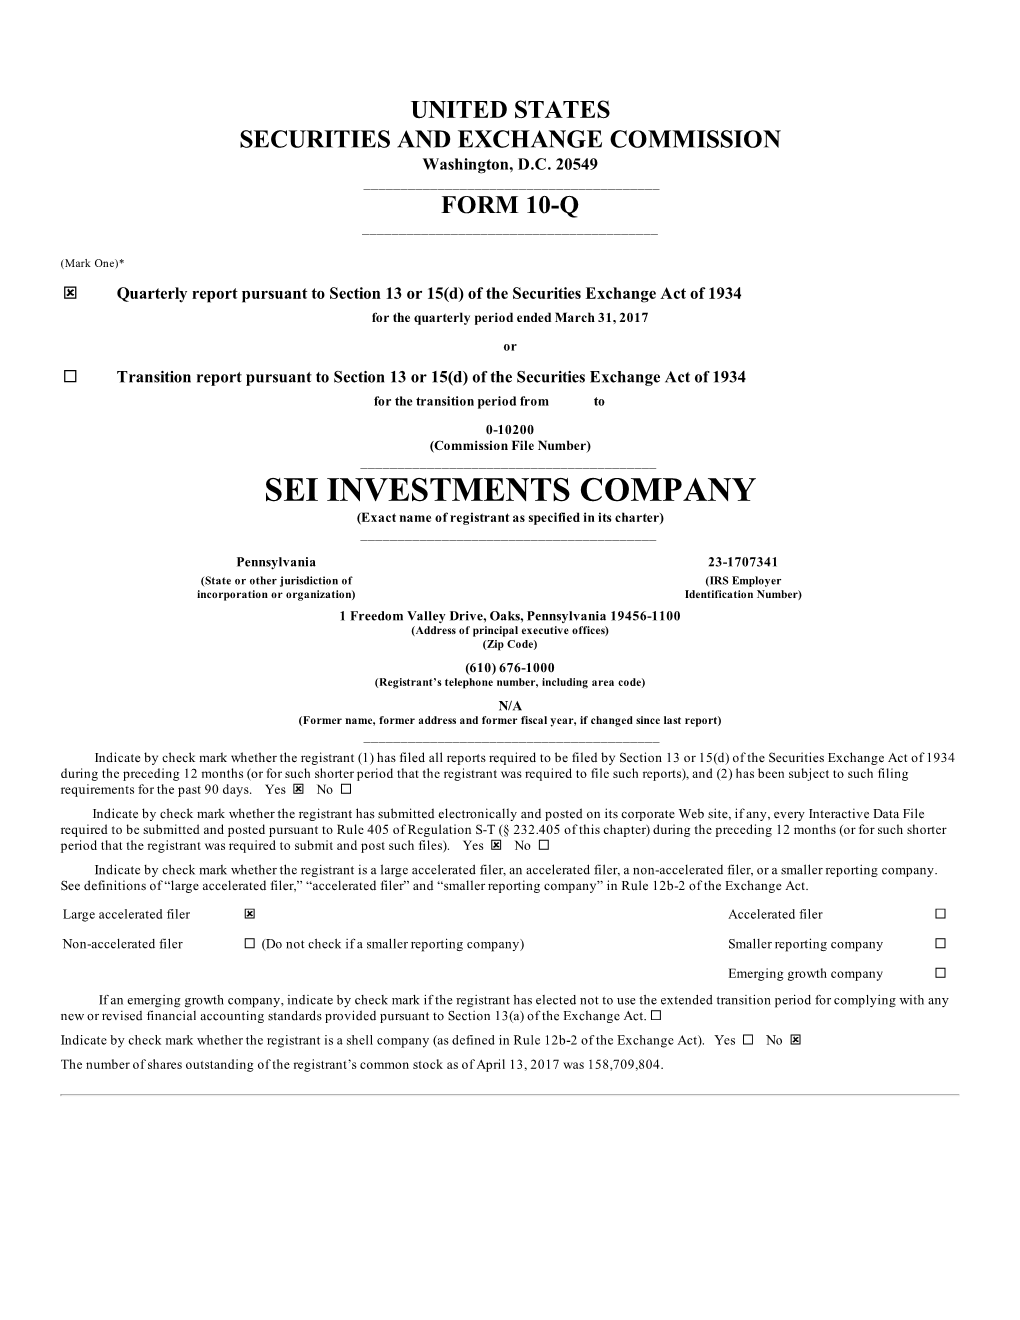 SEI INVESTMENTS COMPANY (Exact Name of Registrant As Specified in Its Charter) ______